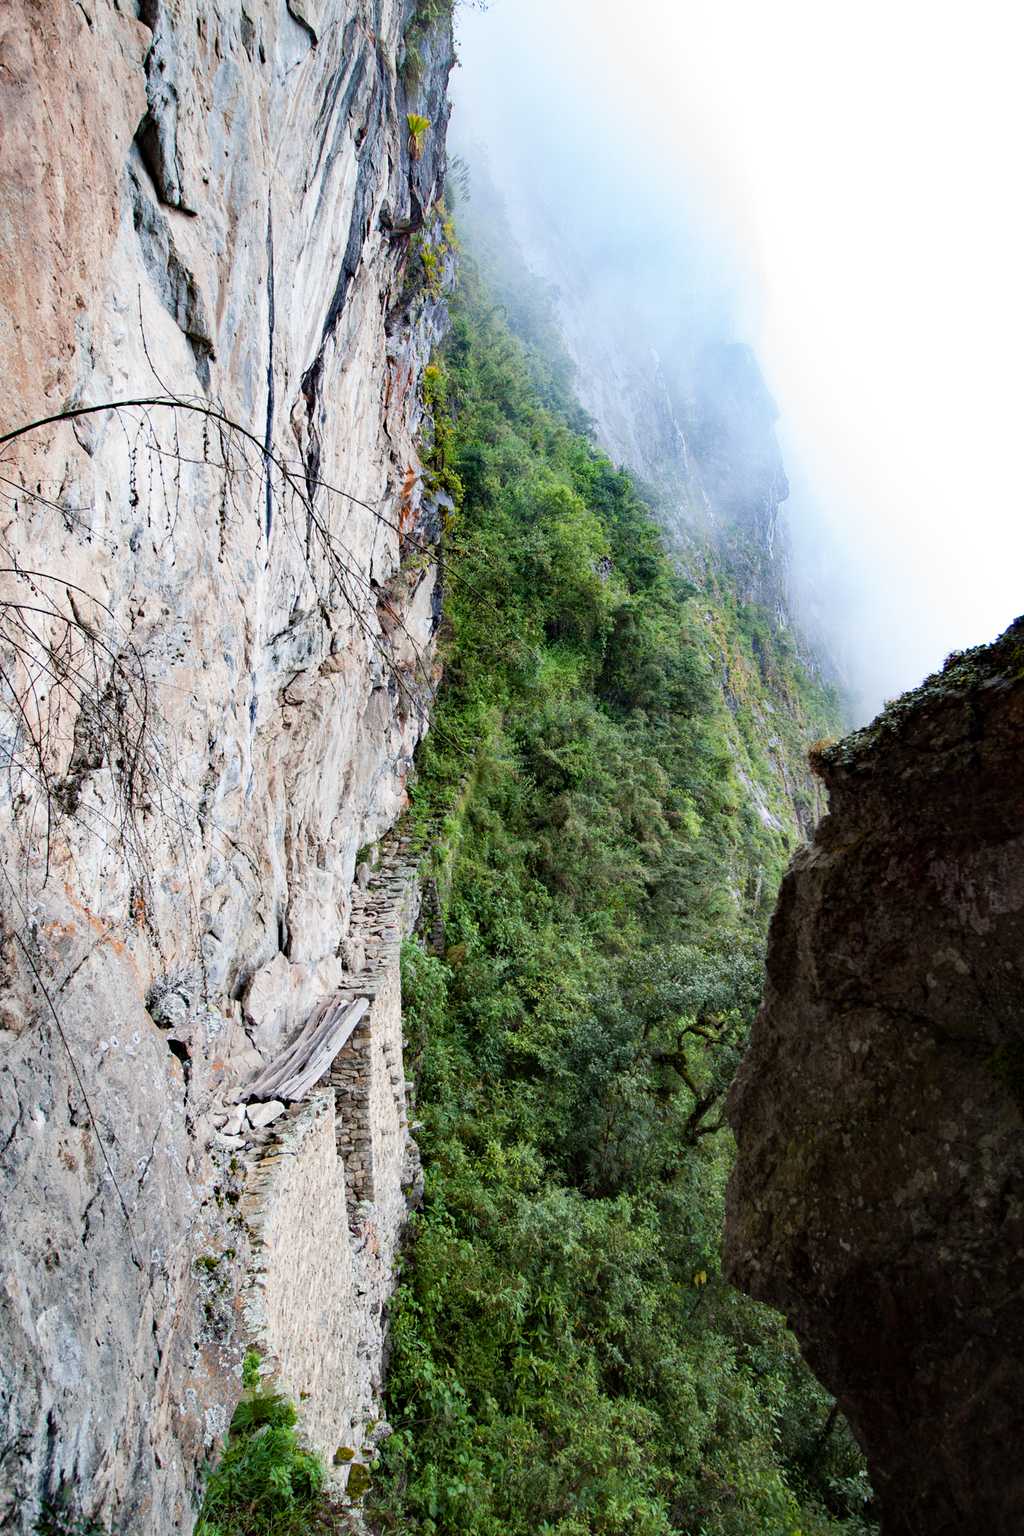 This insane bridge carved into a shear cliff apparently led to Vilcabamba, the last Inca city